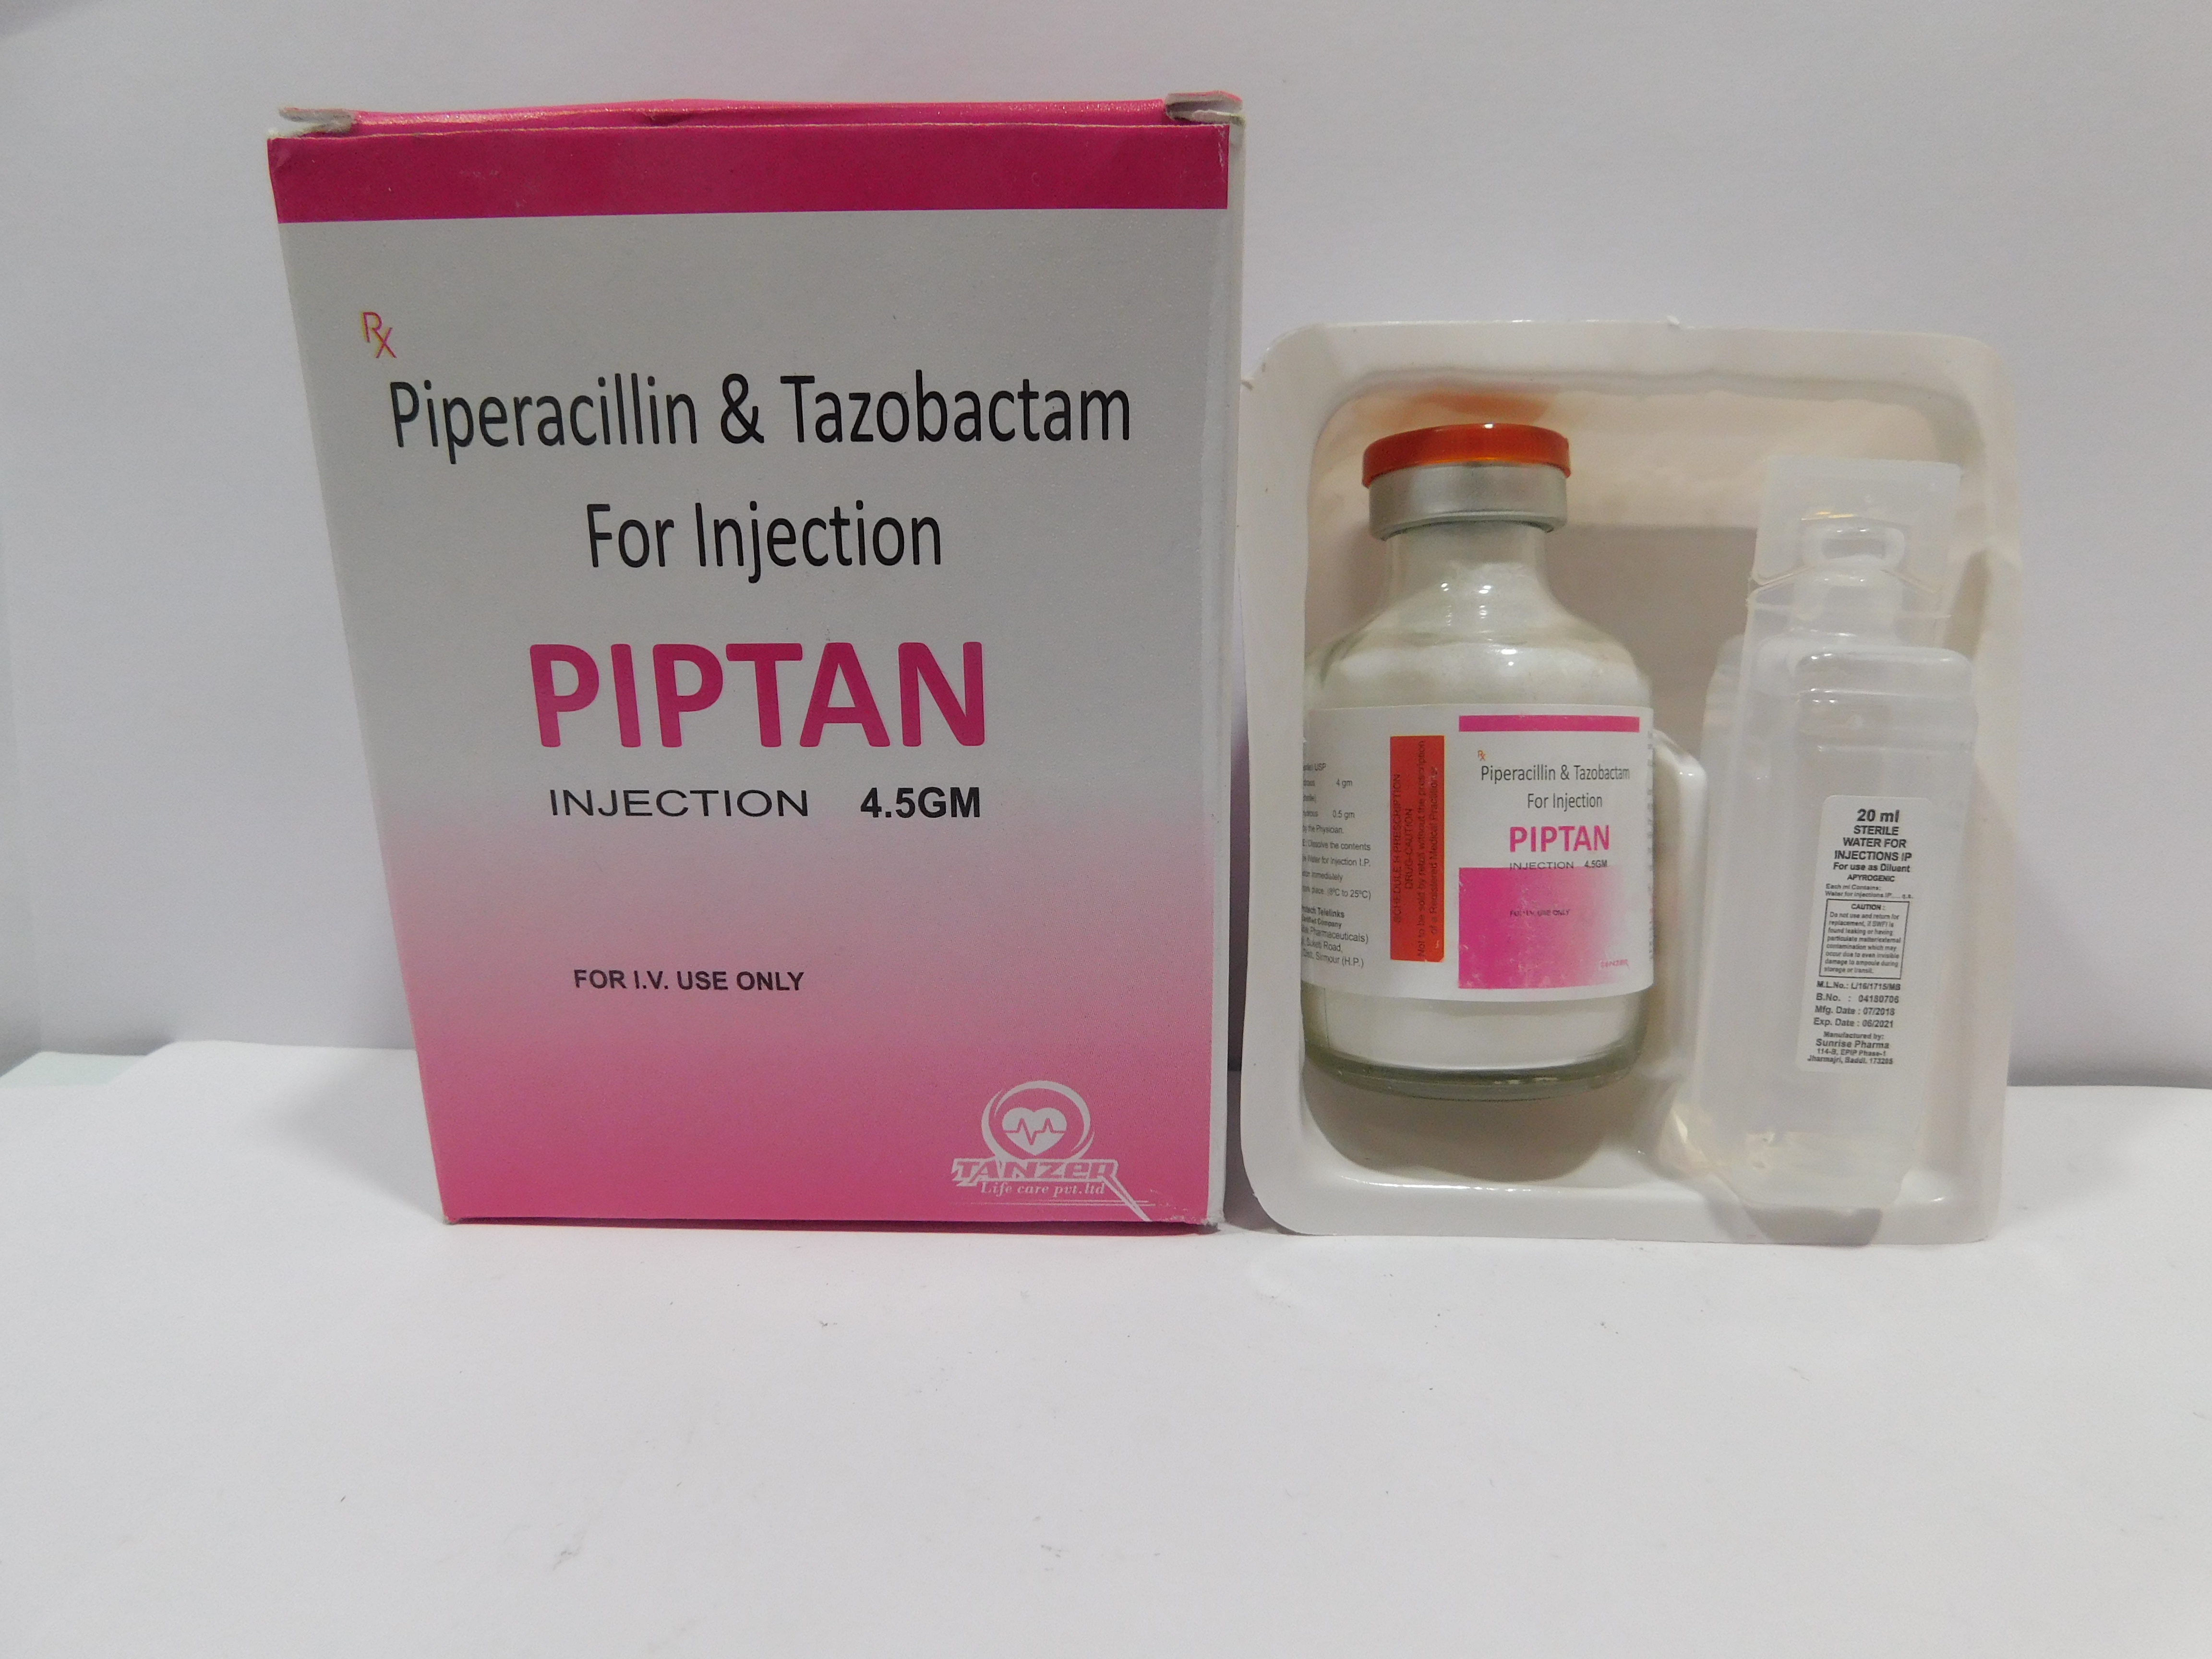 Product Name: PIPTAN, Compositions of PIPTAN are Piperacillin & Tazobactam for Injection - Tanzer Lifecare Private Limited